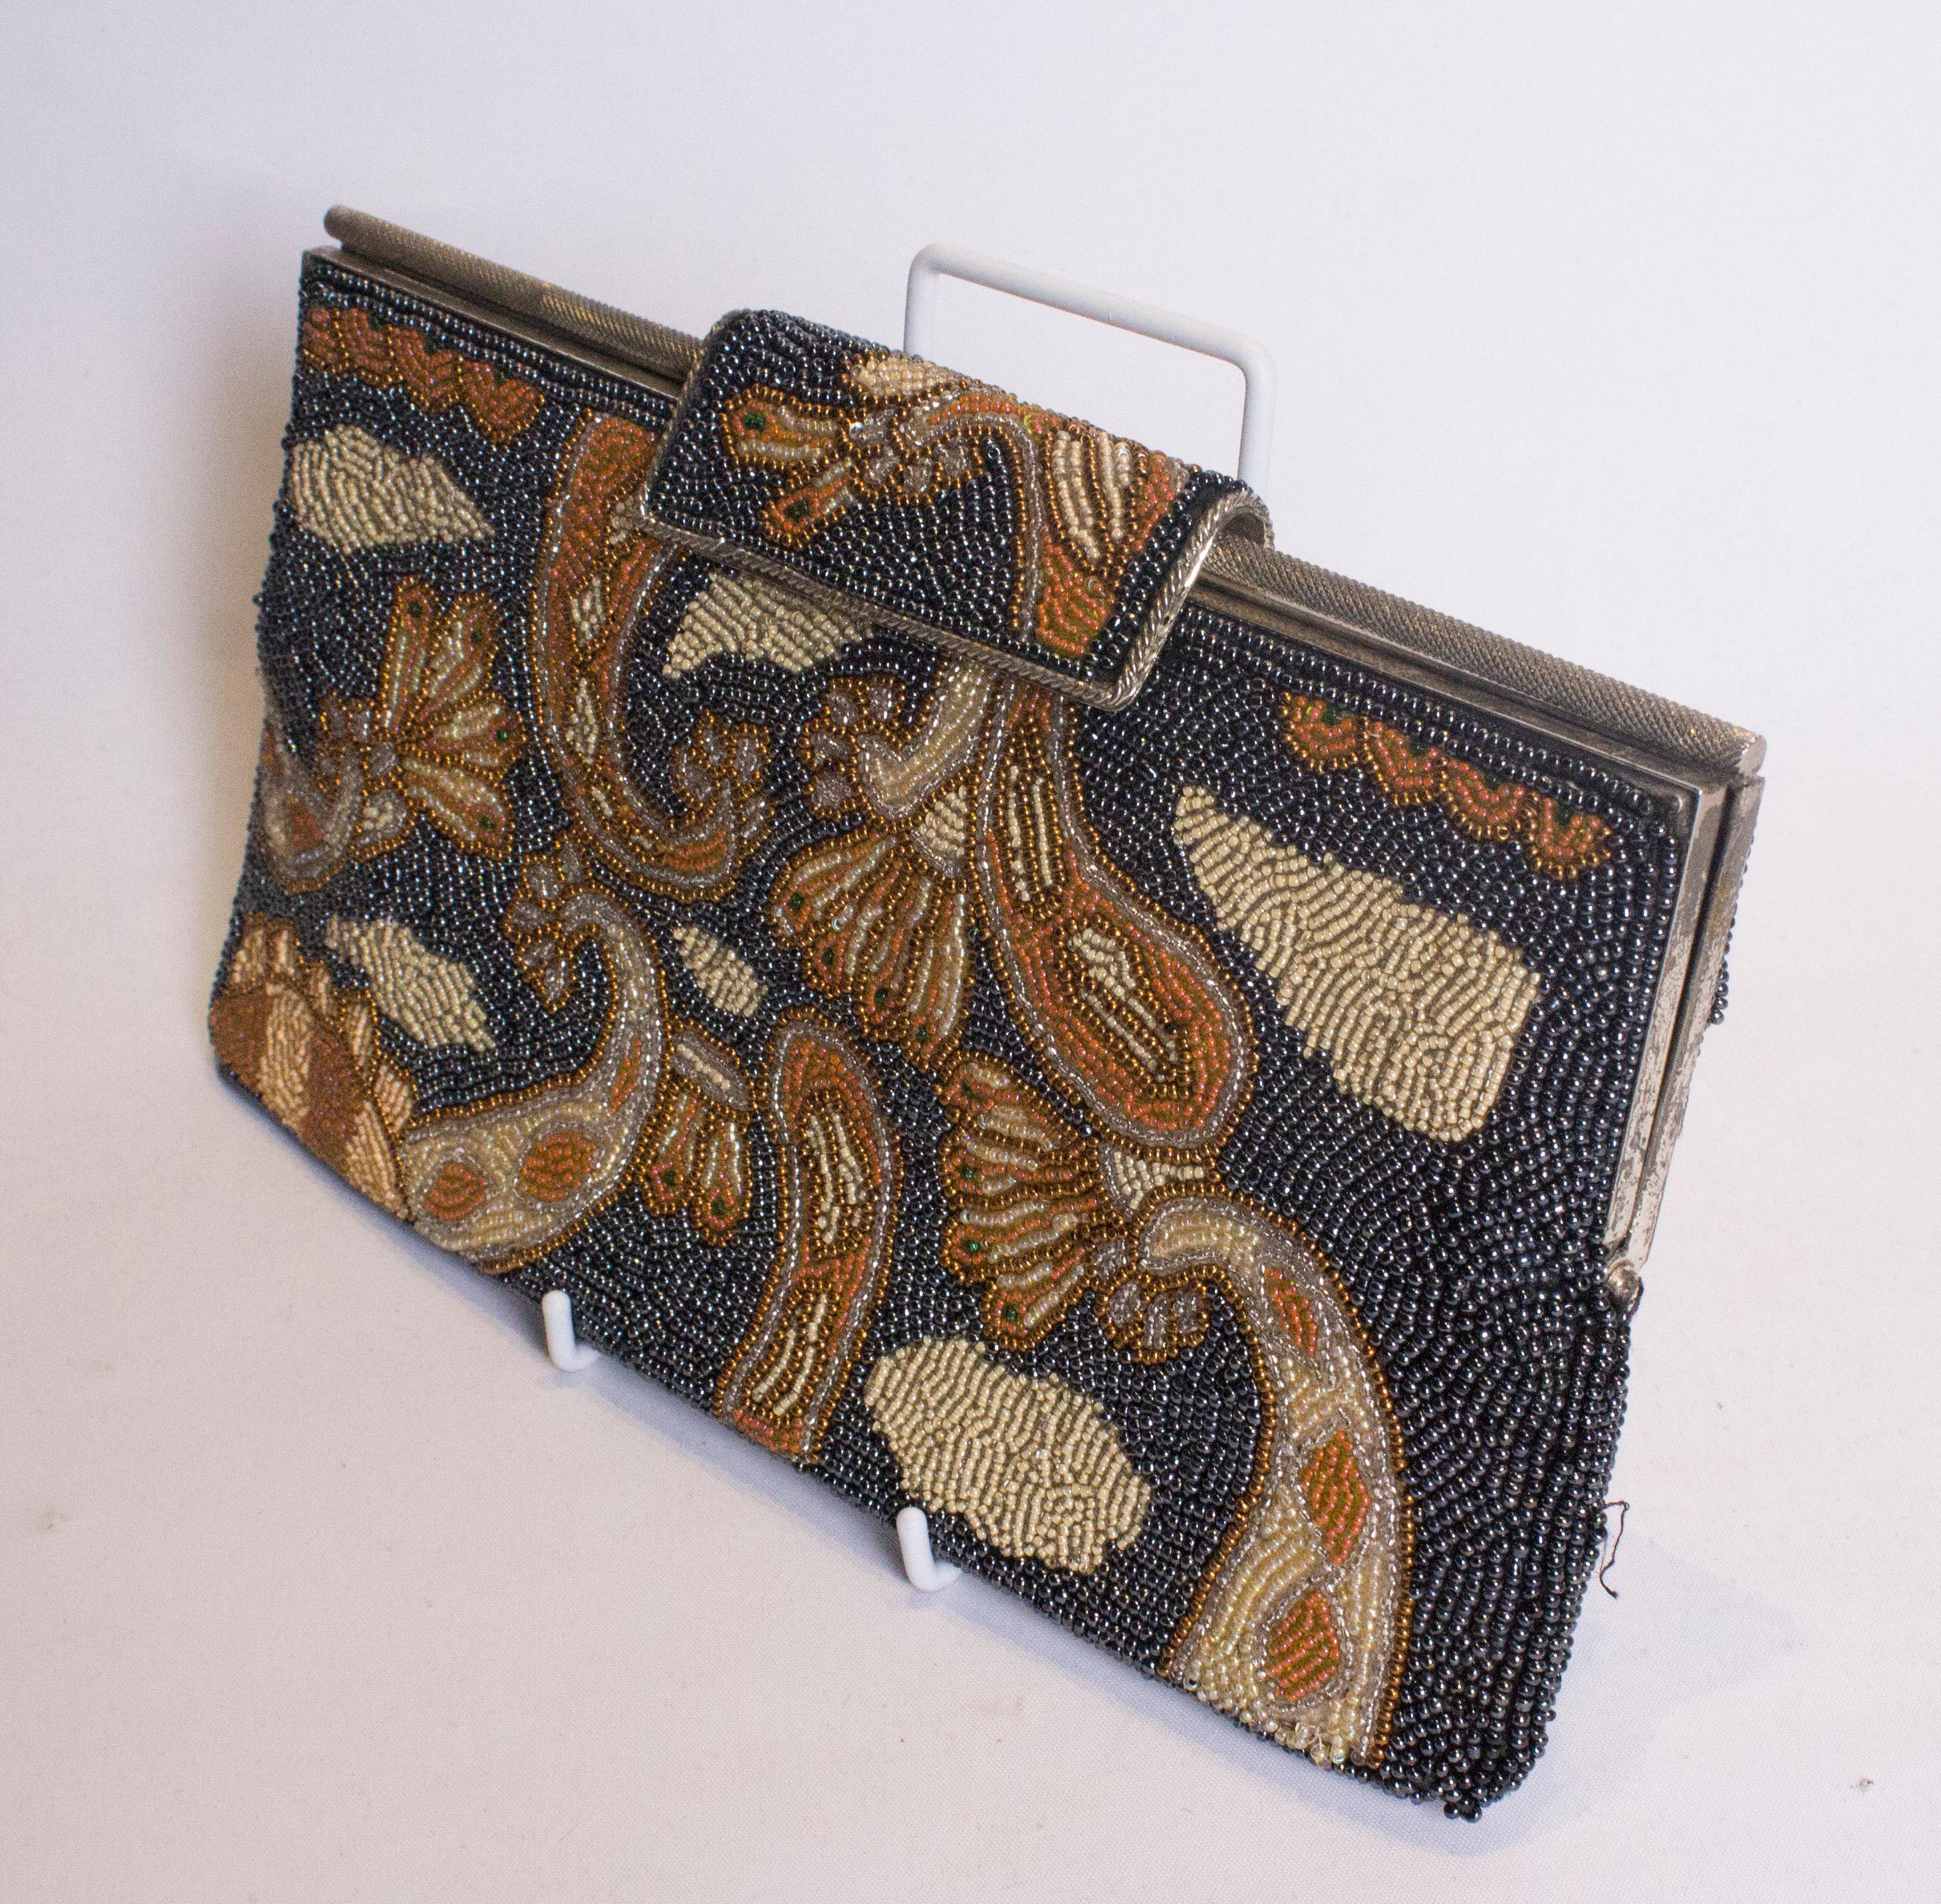 A chic vintage  beaded bag.  The beads are in grey, orange and yellow in an attractive pattern. The bag has a fold over clasp and is lined with one pouch pocket,. Measurements: width 11''. height 6'',depth 1''